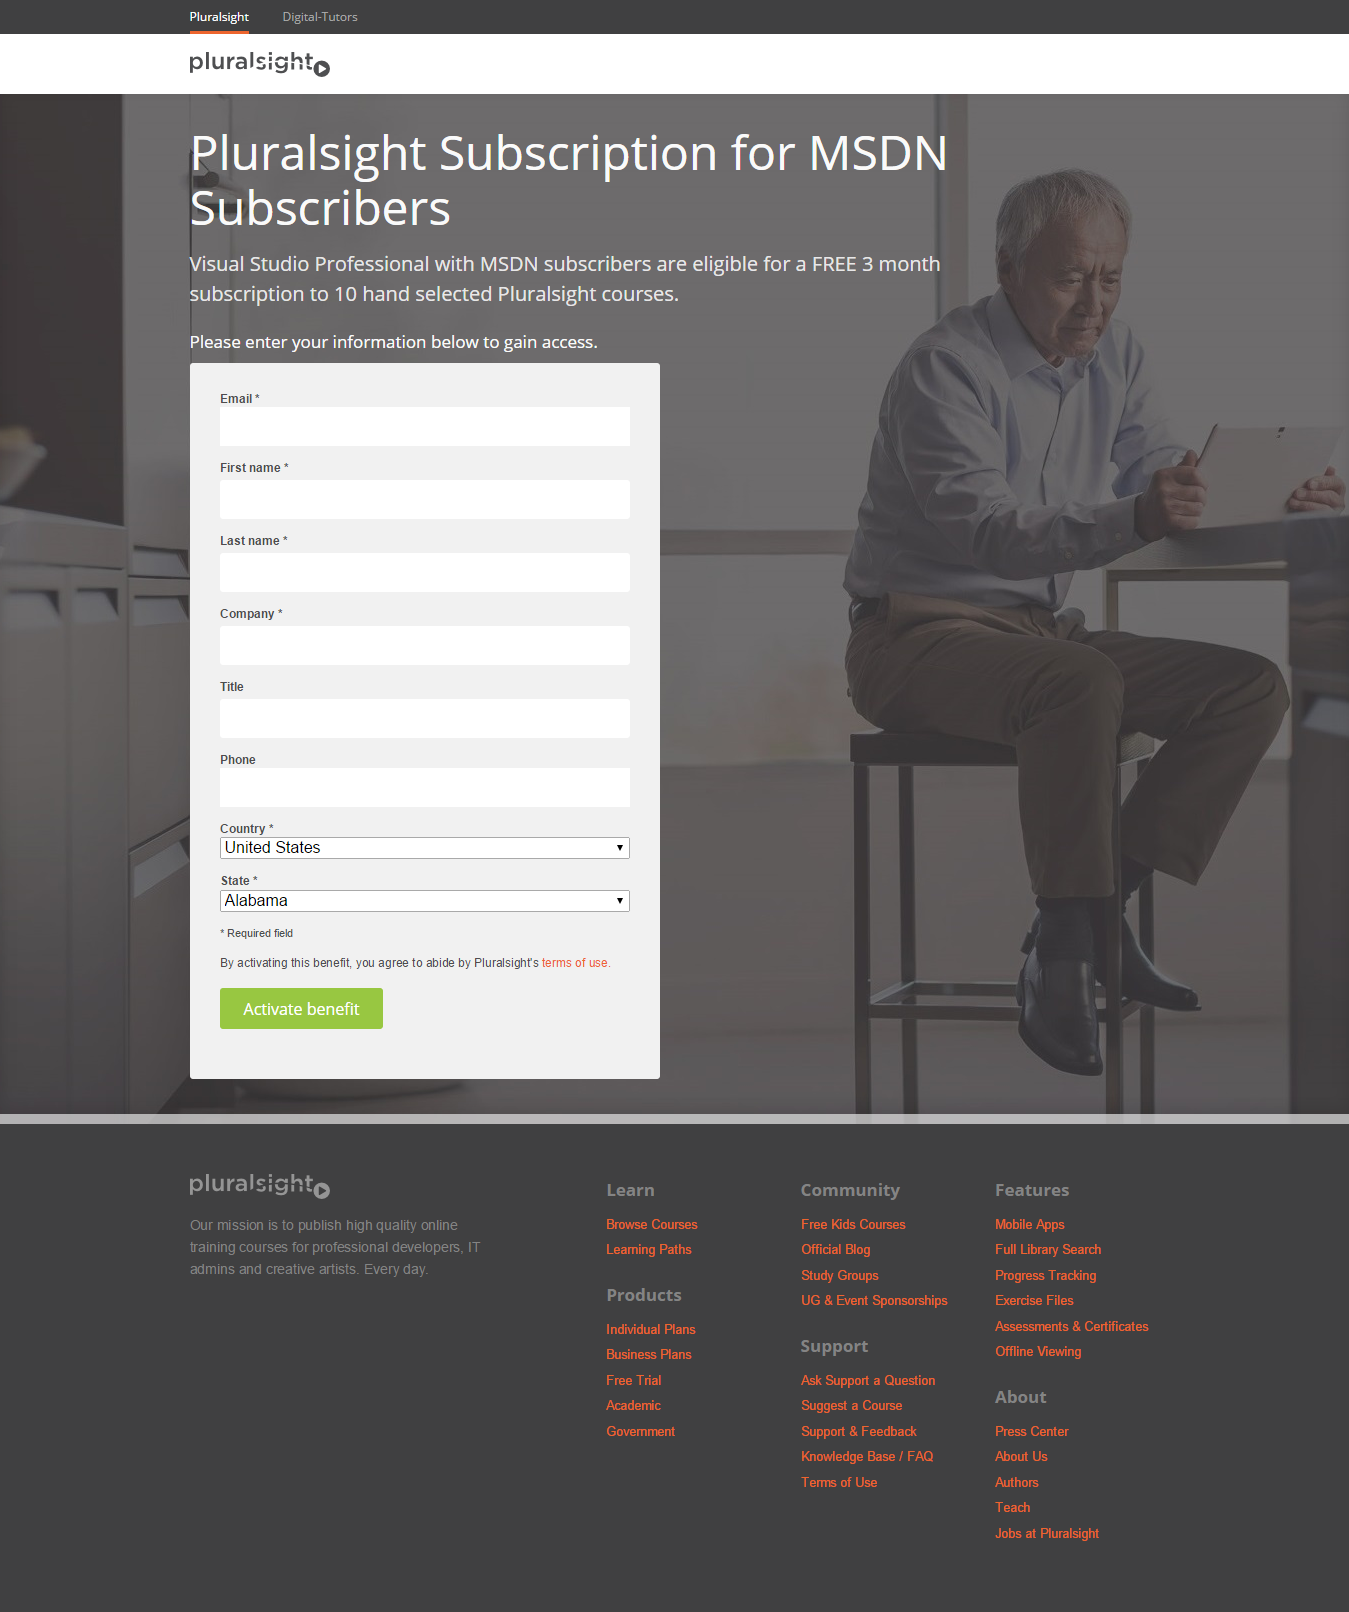 Pluralsight's MSDN signup page